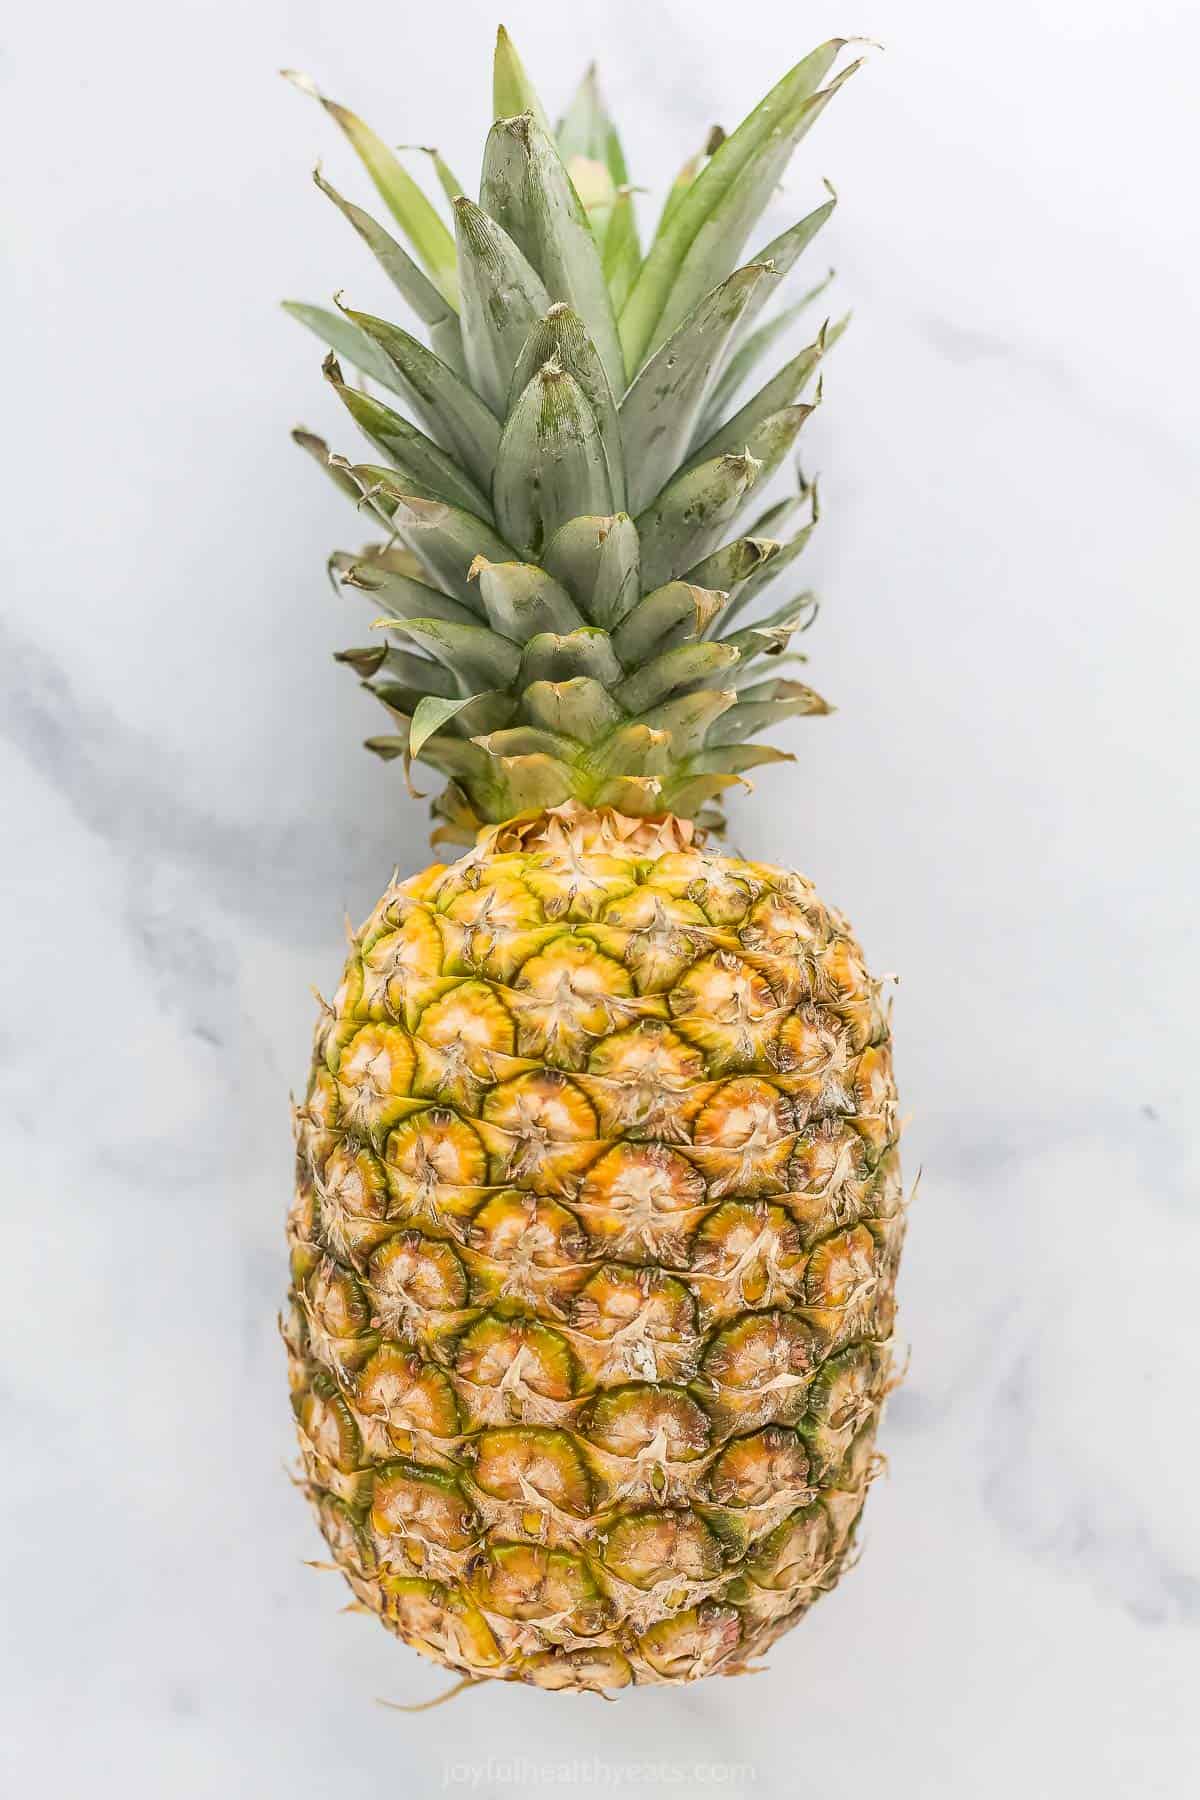 A fresh pineapple laying down on a gray and white marble countertop